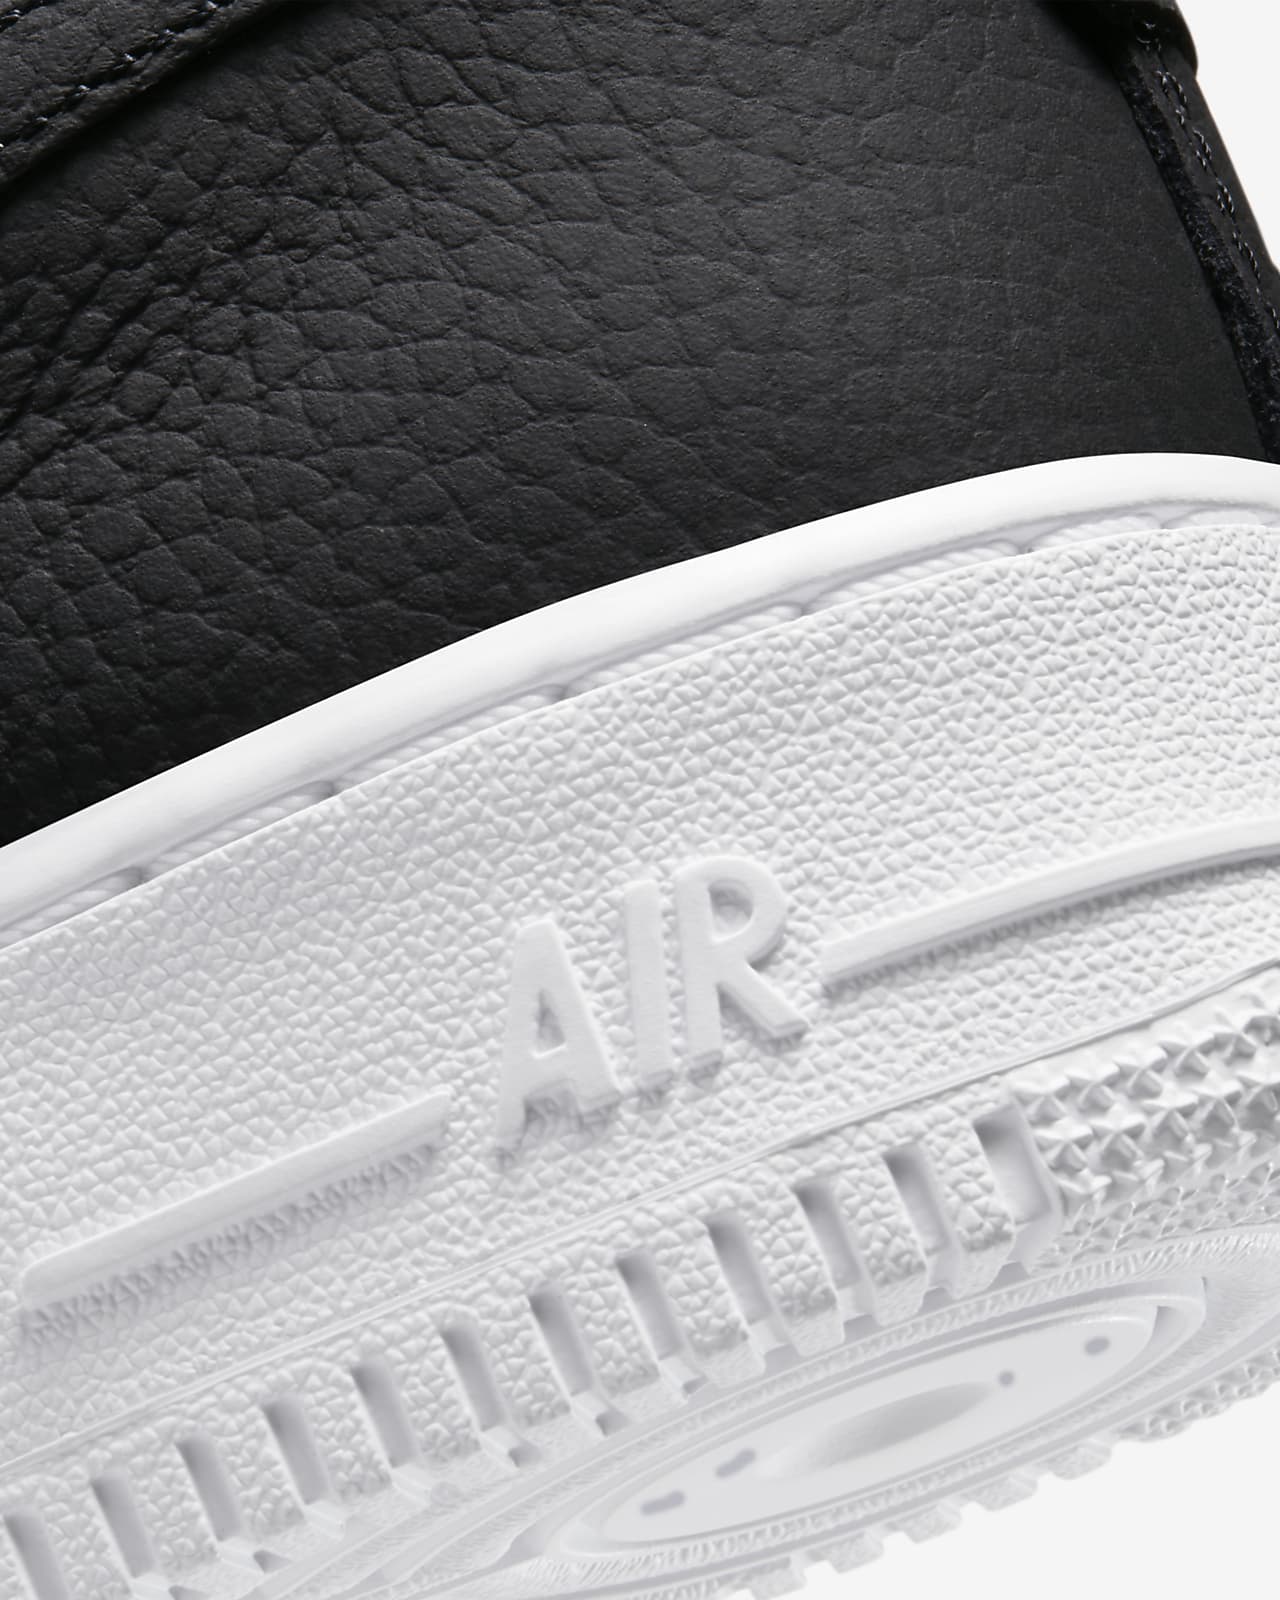 white nike trainers air force 1